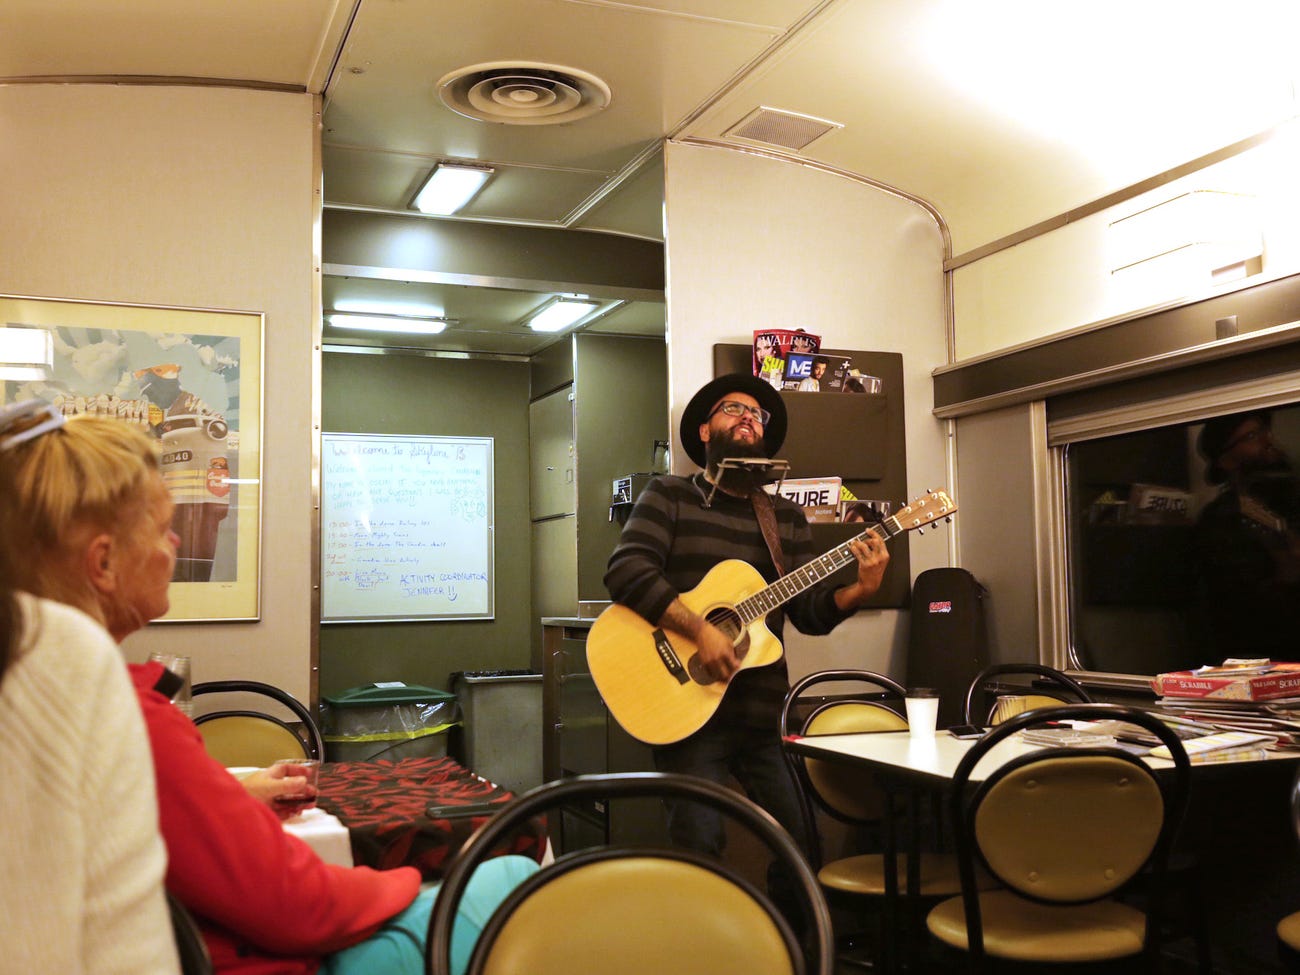 Andy do Rego gave a concert in our compartment.